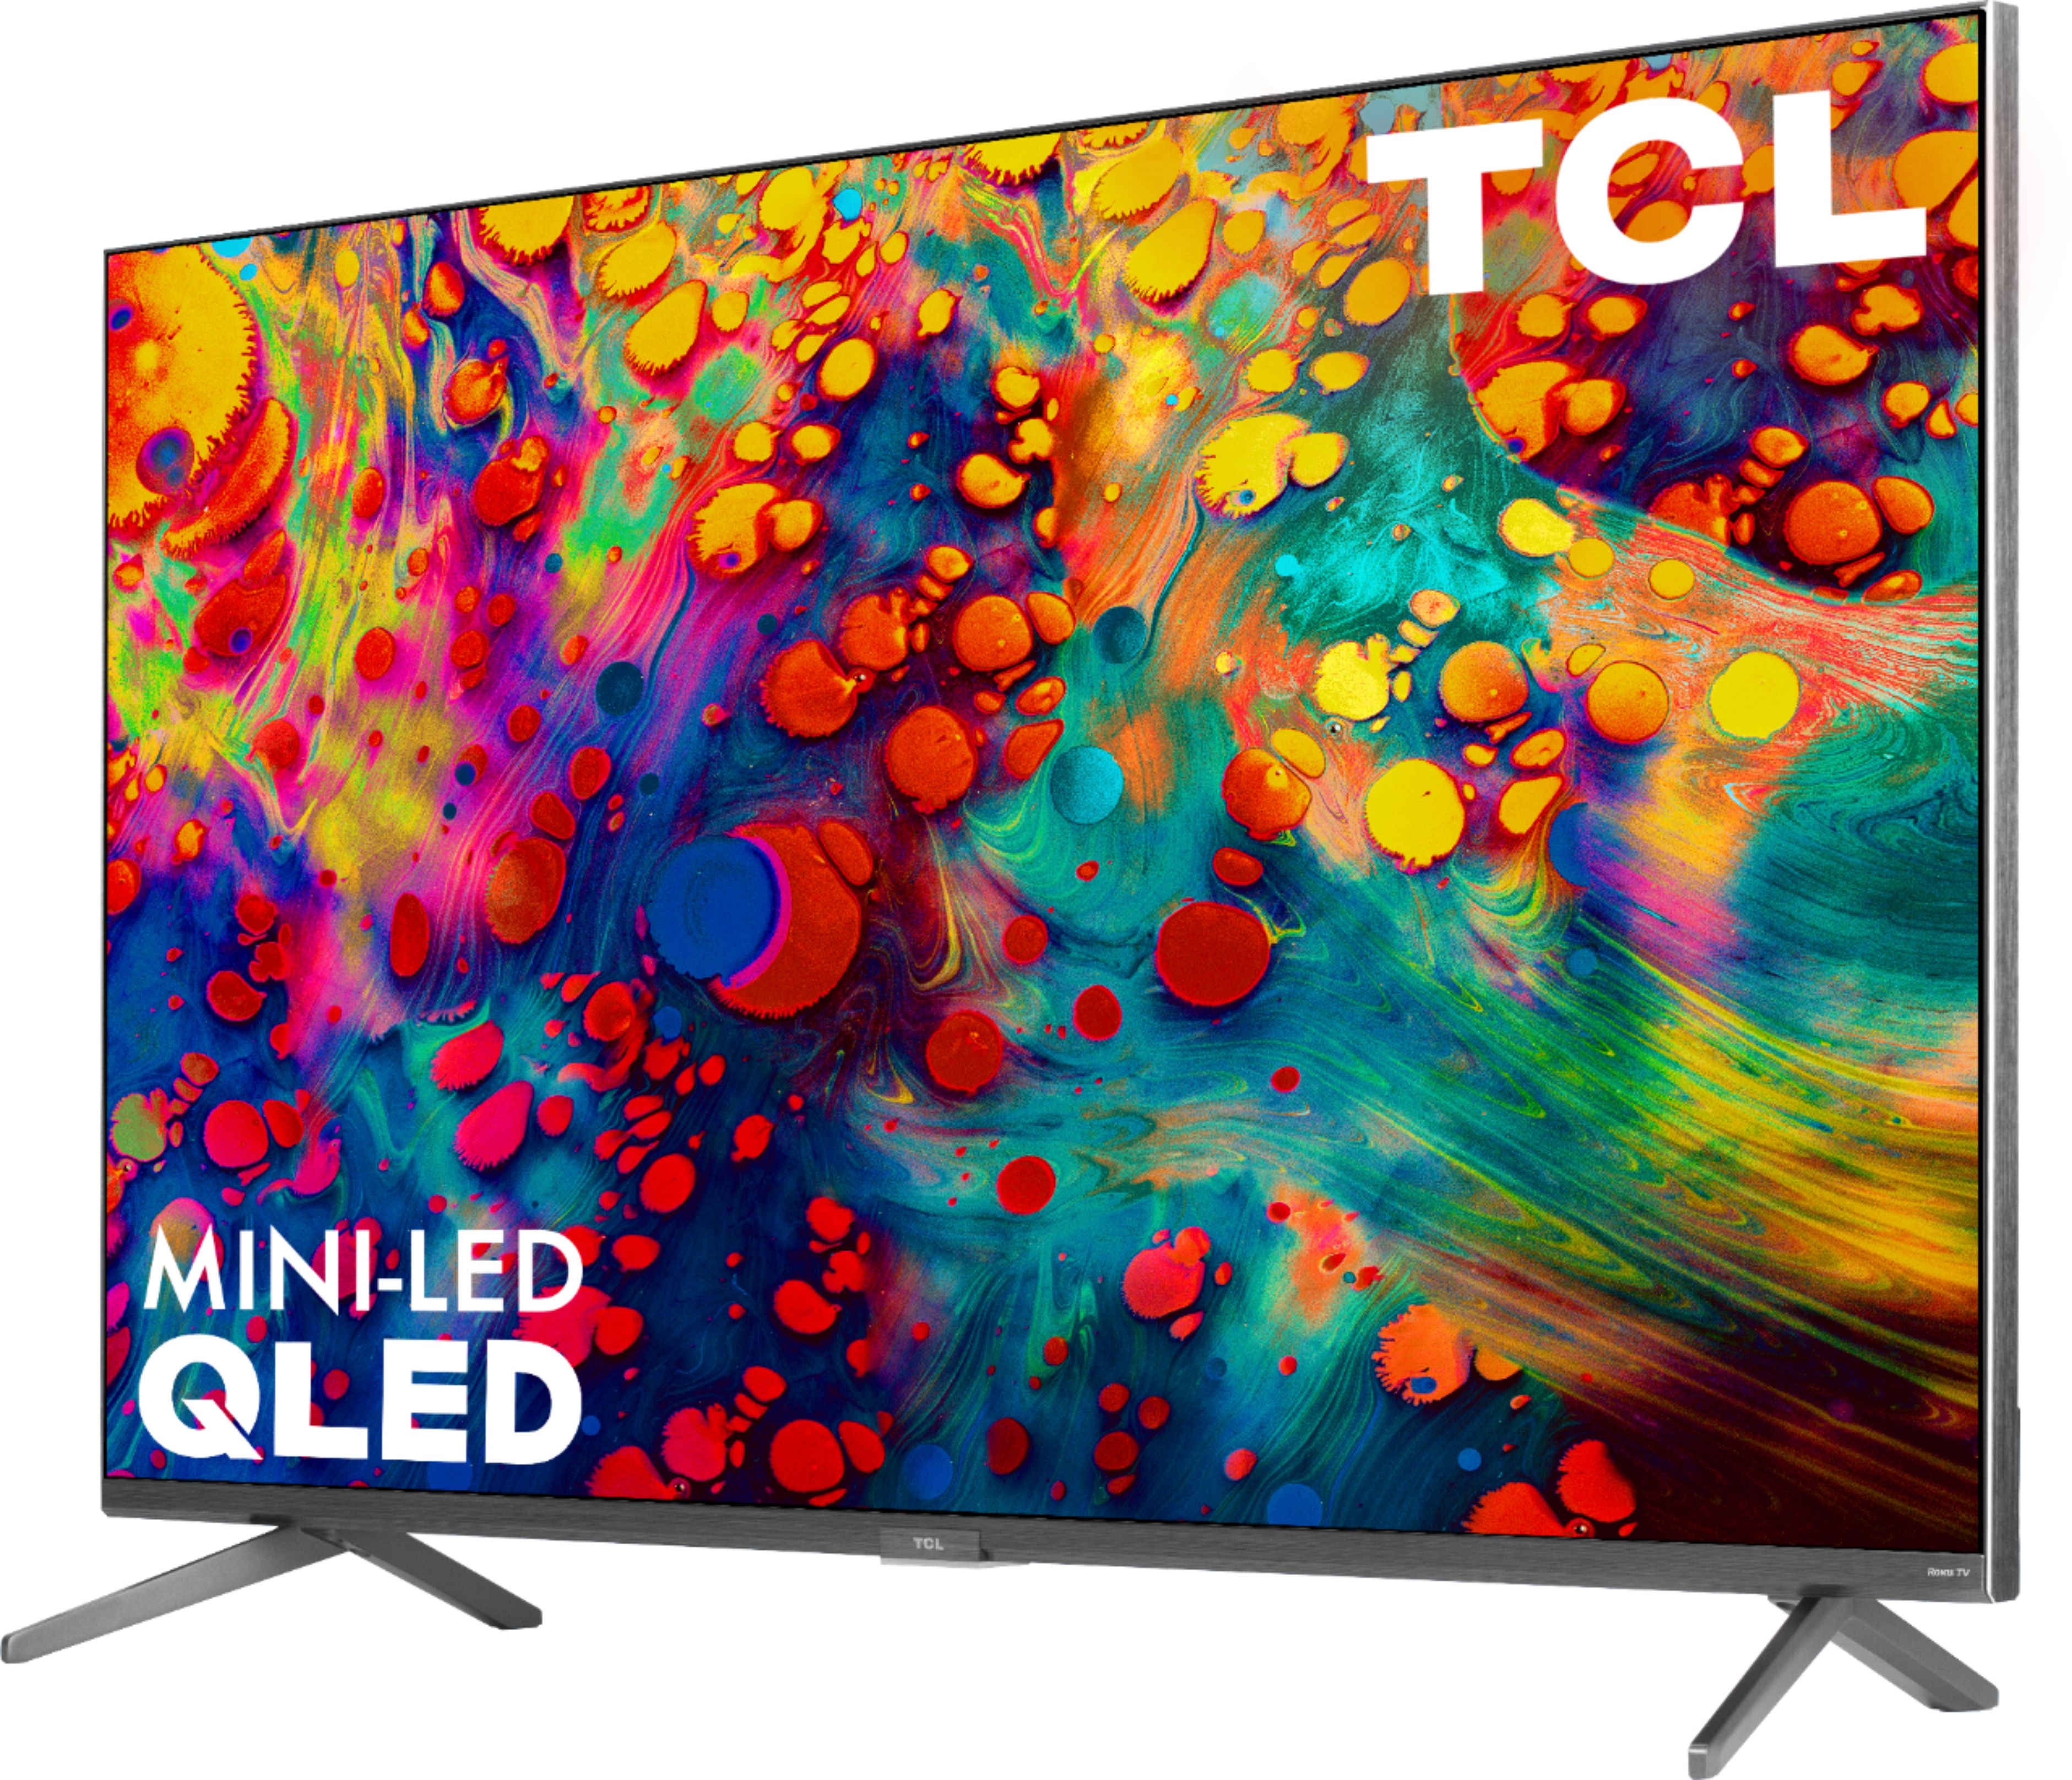 Left View: TCL - 65” Class 6-Series 4K UHD Mini-LED QLED Dolby Vision HDR Roku Smart TV - 65R635